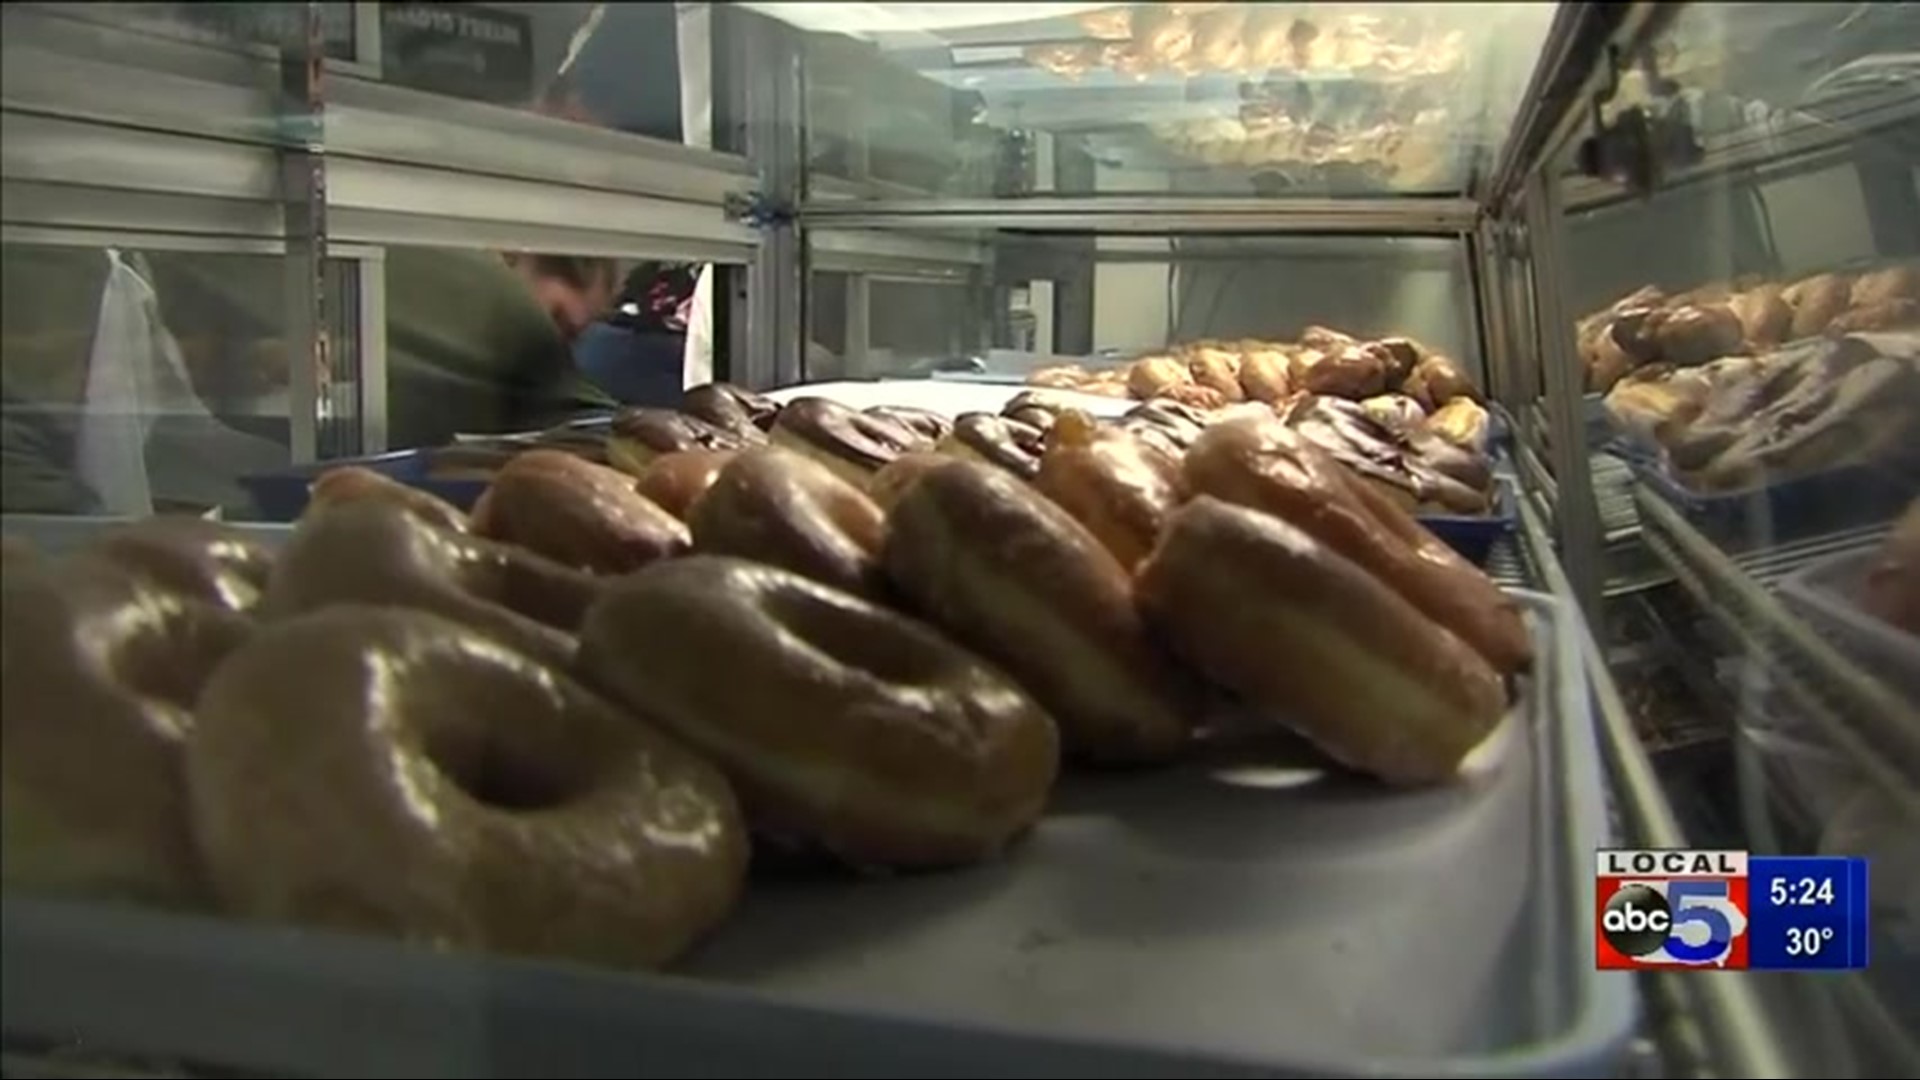 Hiland Bakery reopens in Des Moines | weareiowa.com